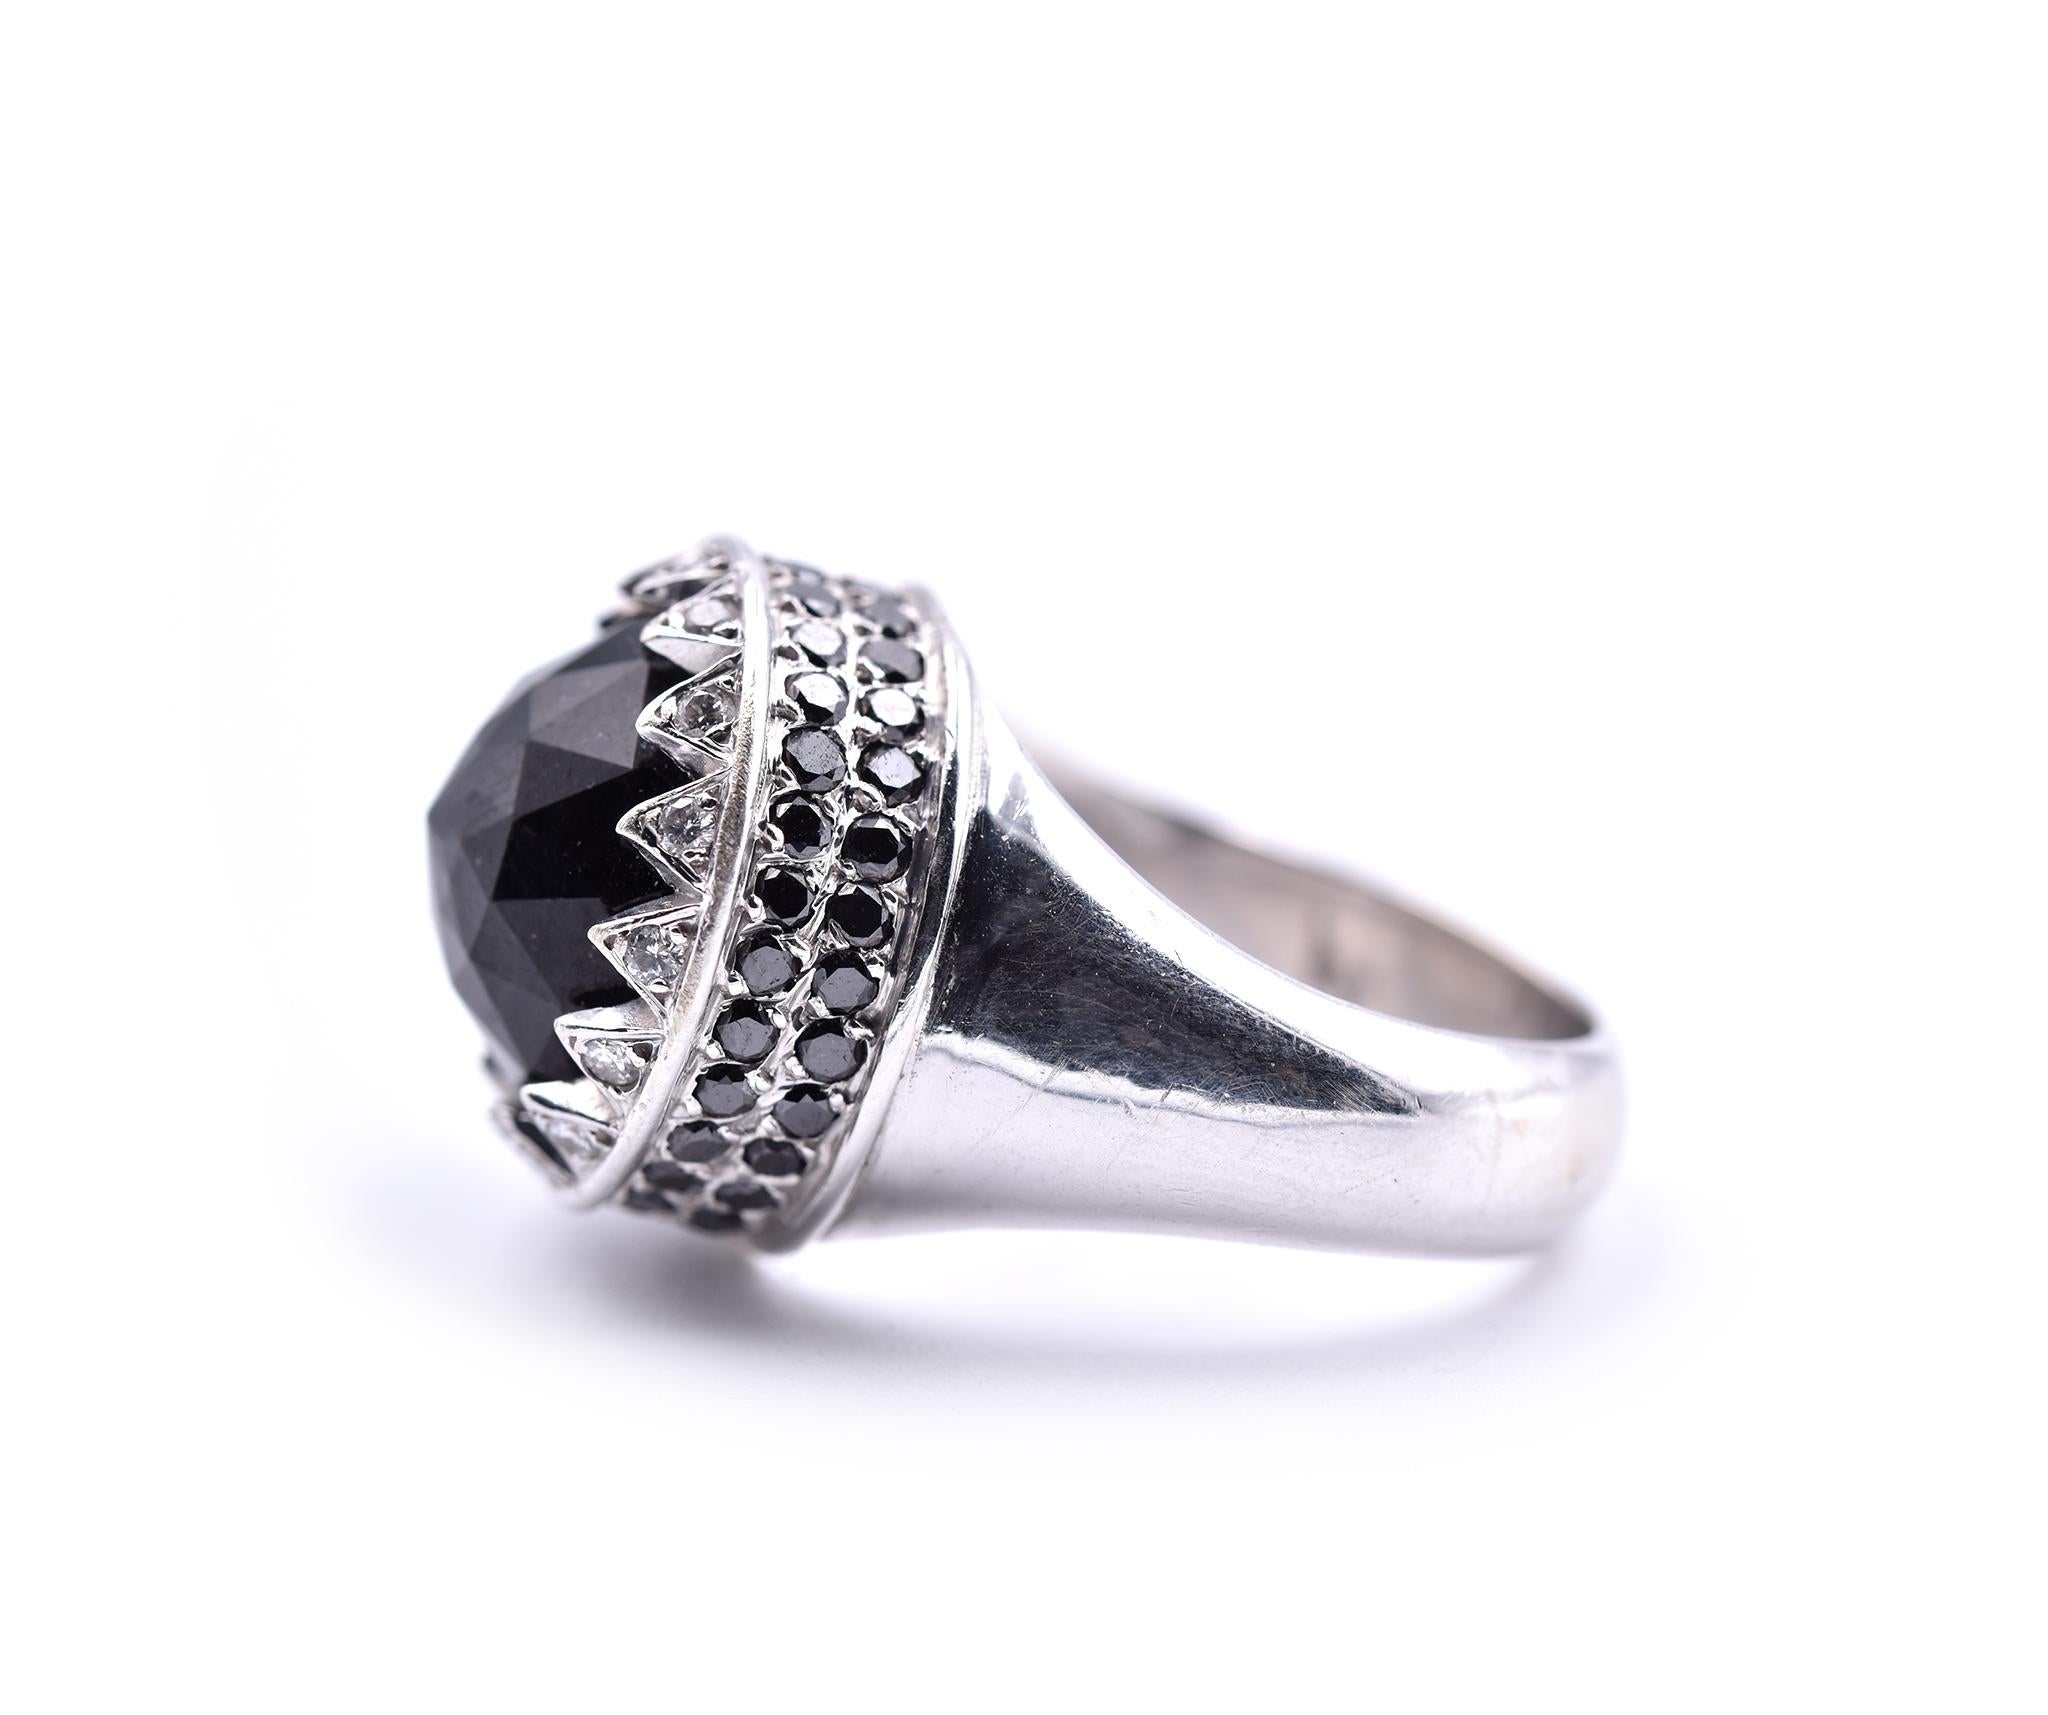 Designer: custom design
Material: 14k white gold
Center Stone: 1 faceted black spinel
Diamonds: 16 round brilliant cuts = 0.16cttw
Black Diamonds: 56 black round diamonds = 0.38cttw
Ring Size: 6 ¾ (please allow two additional shipping days for